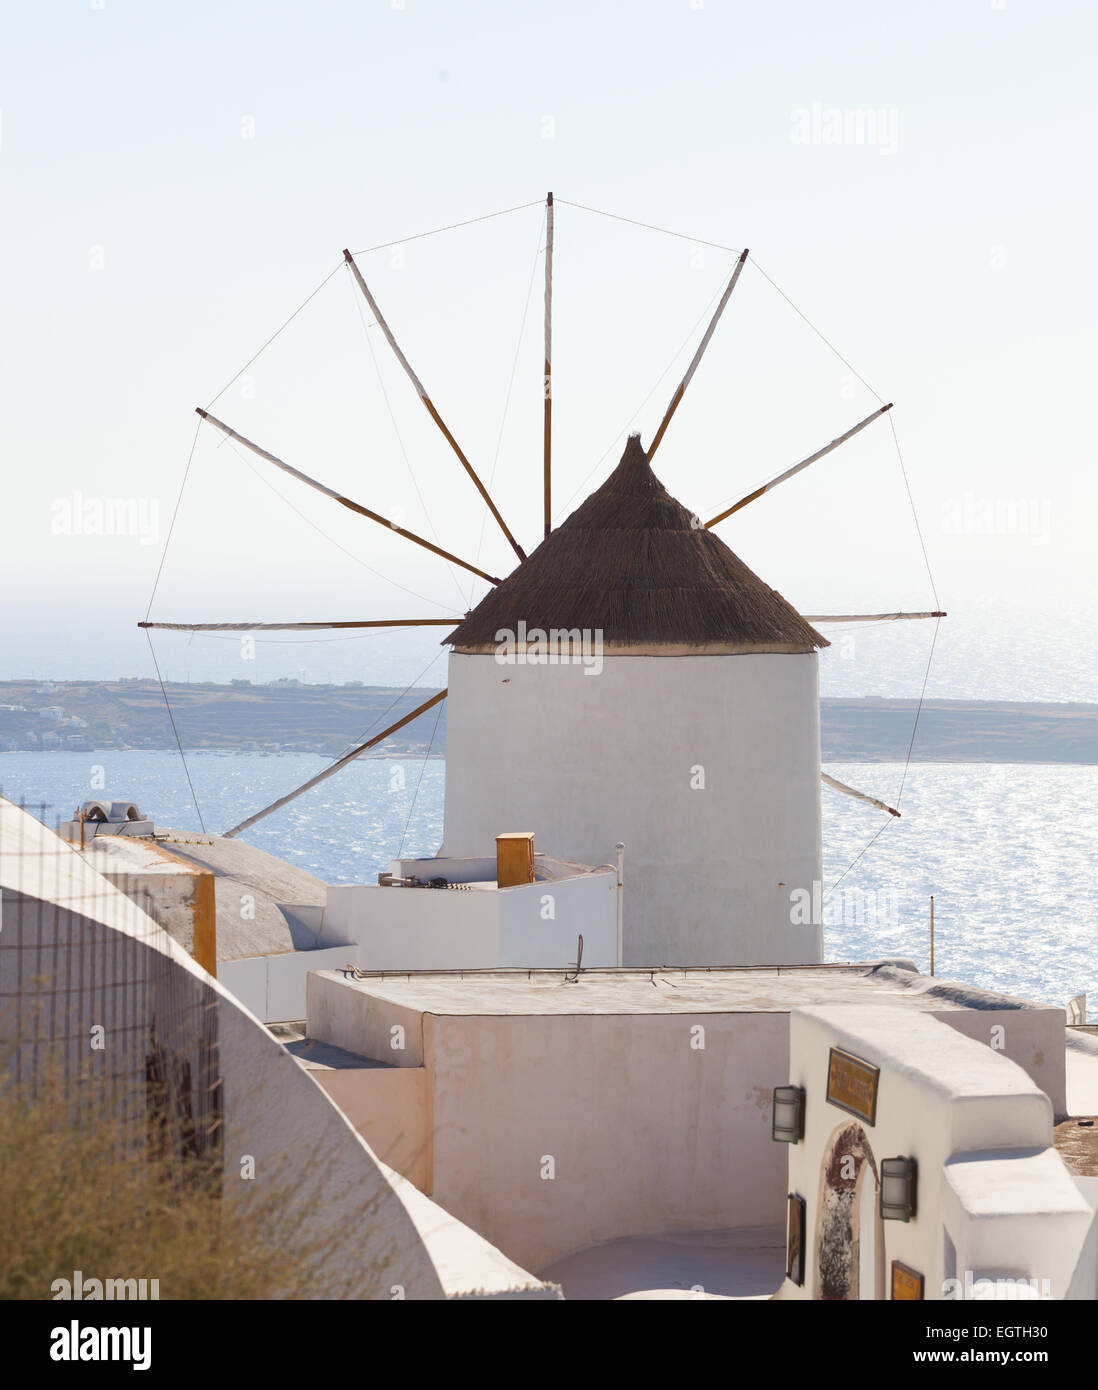 Windmill in Oia, Santorini. Oia is a village in the north west edge of the Santorini island with white houses. Stock Photo